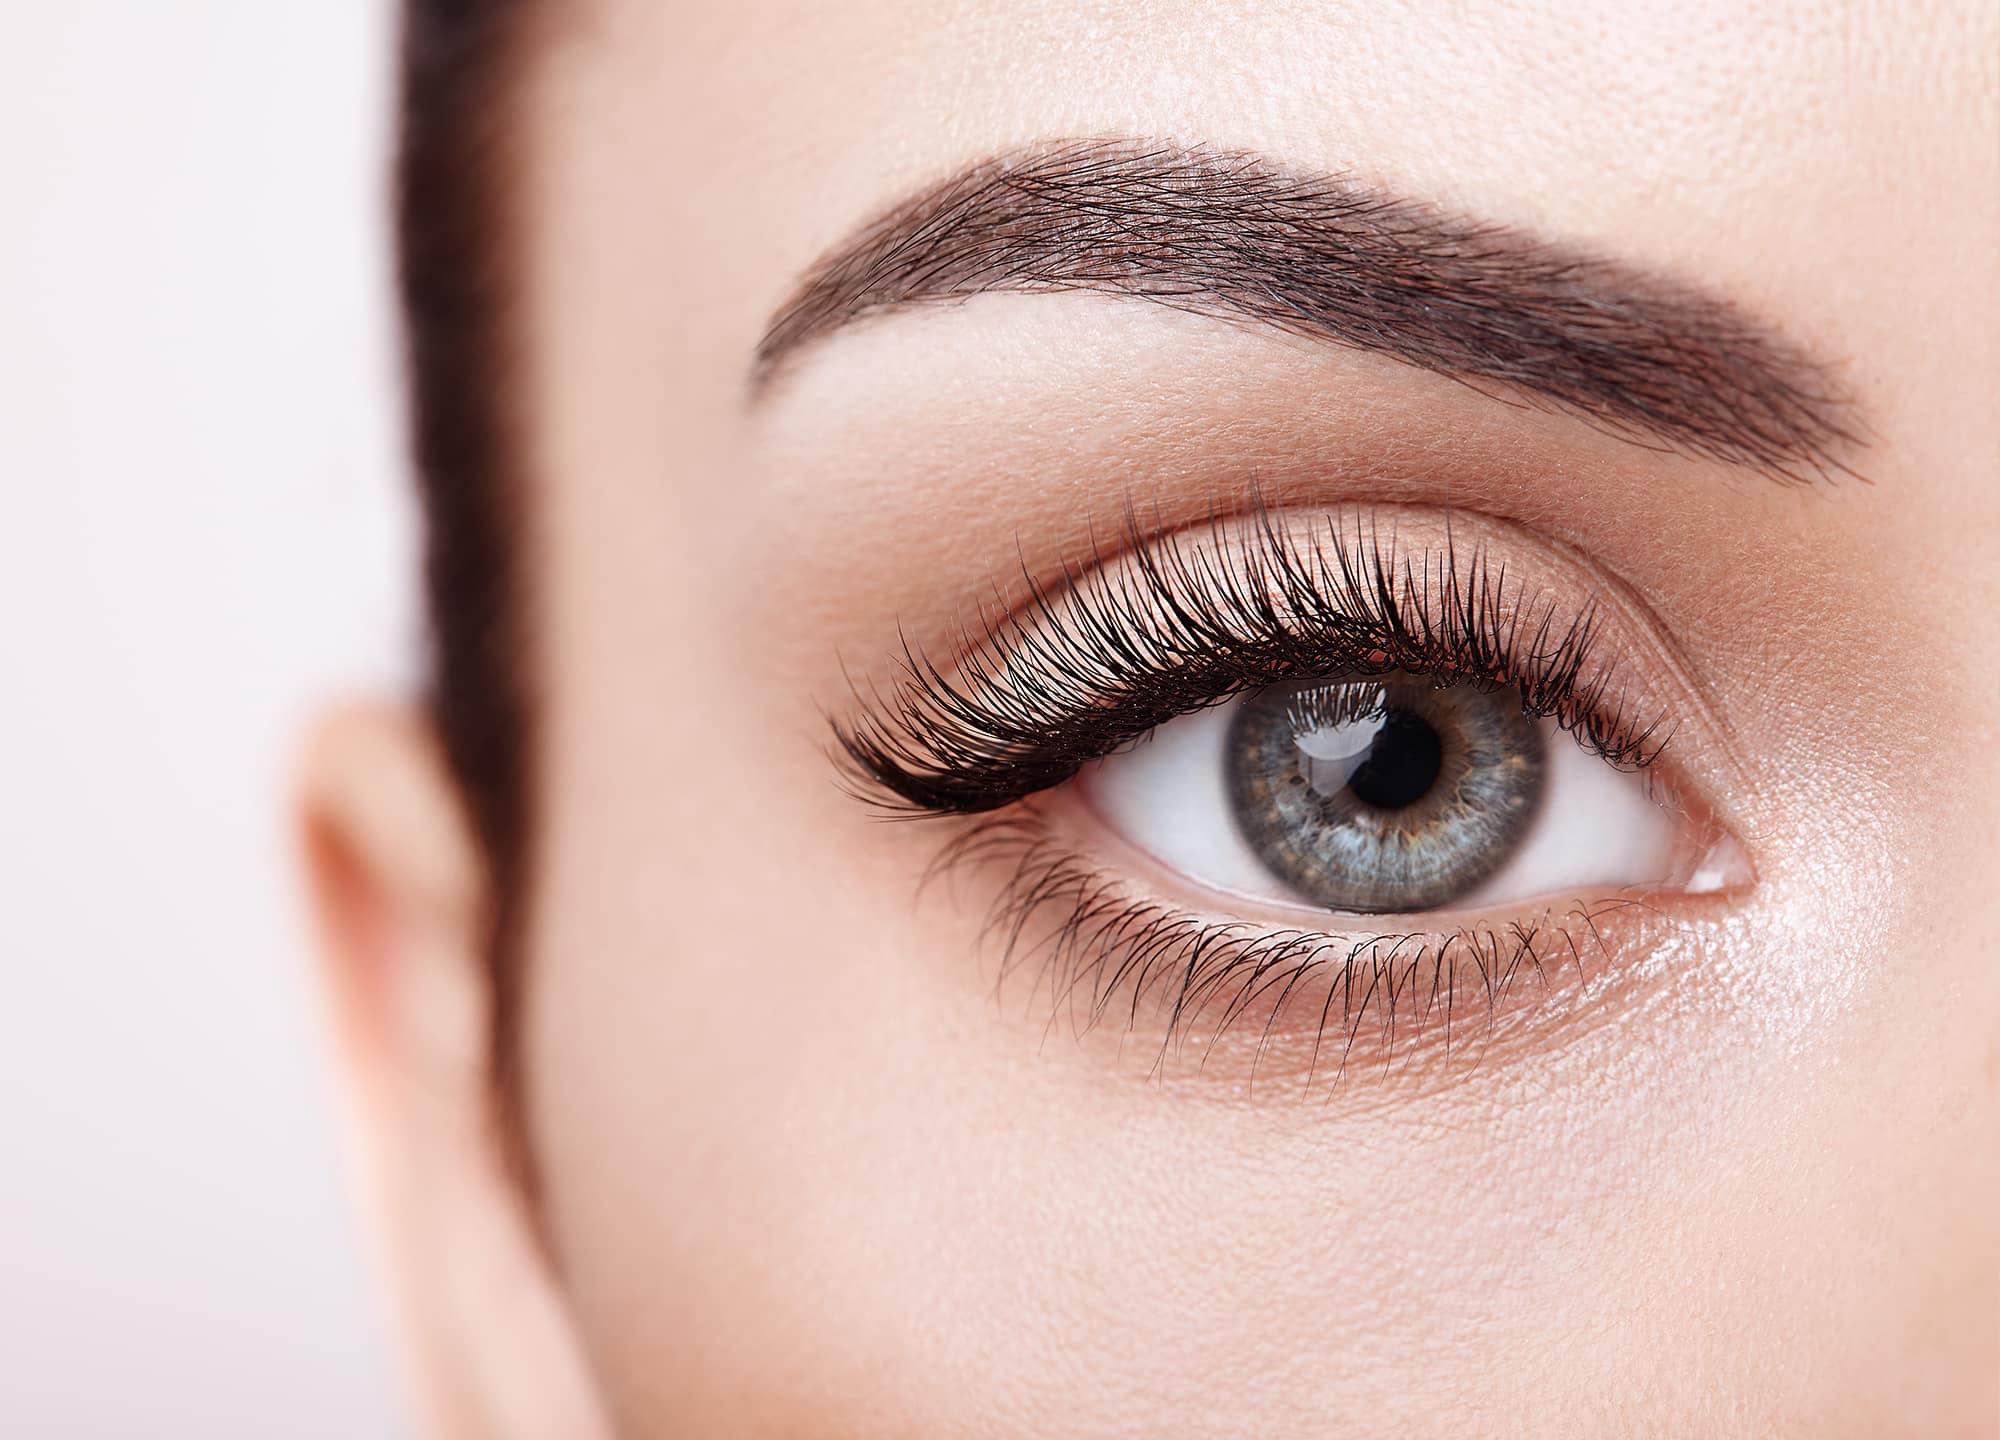 Brighter, Better, and Beautiful: The Best Light for Lash Extensions!